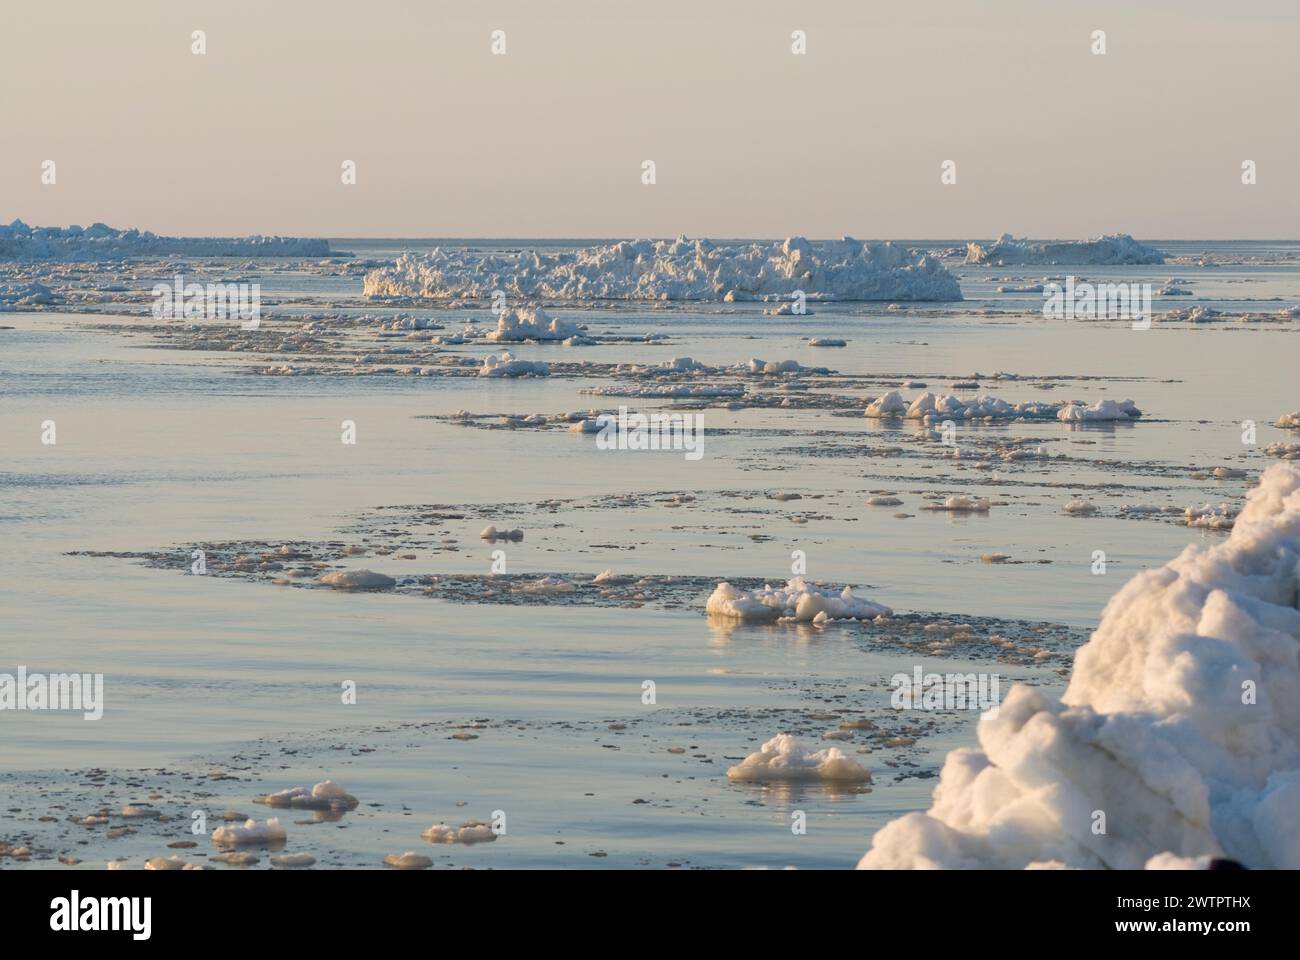 Seascape of open lead rough pack ice over the Chukchi sea in springtime, off shore from the arctic village of Utqiagvik Arctic Alaska Stock Photo